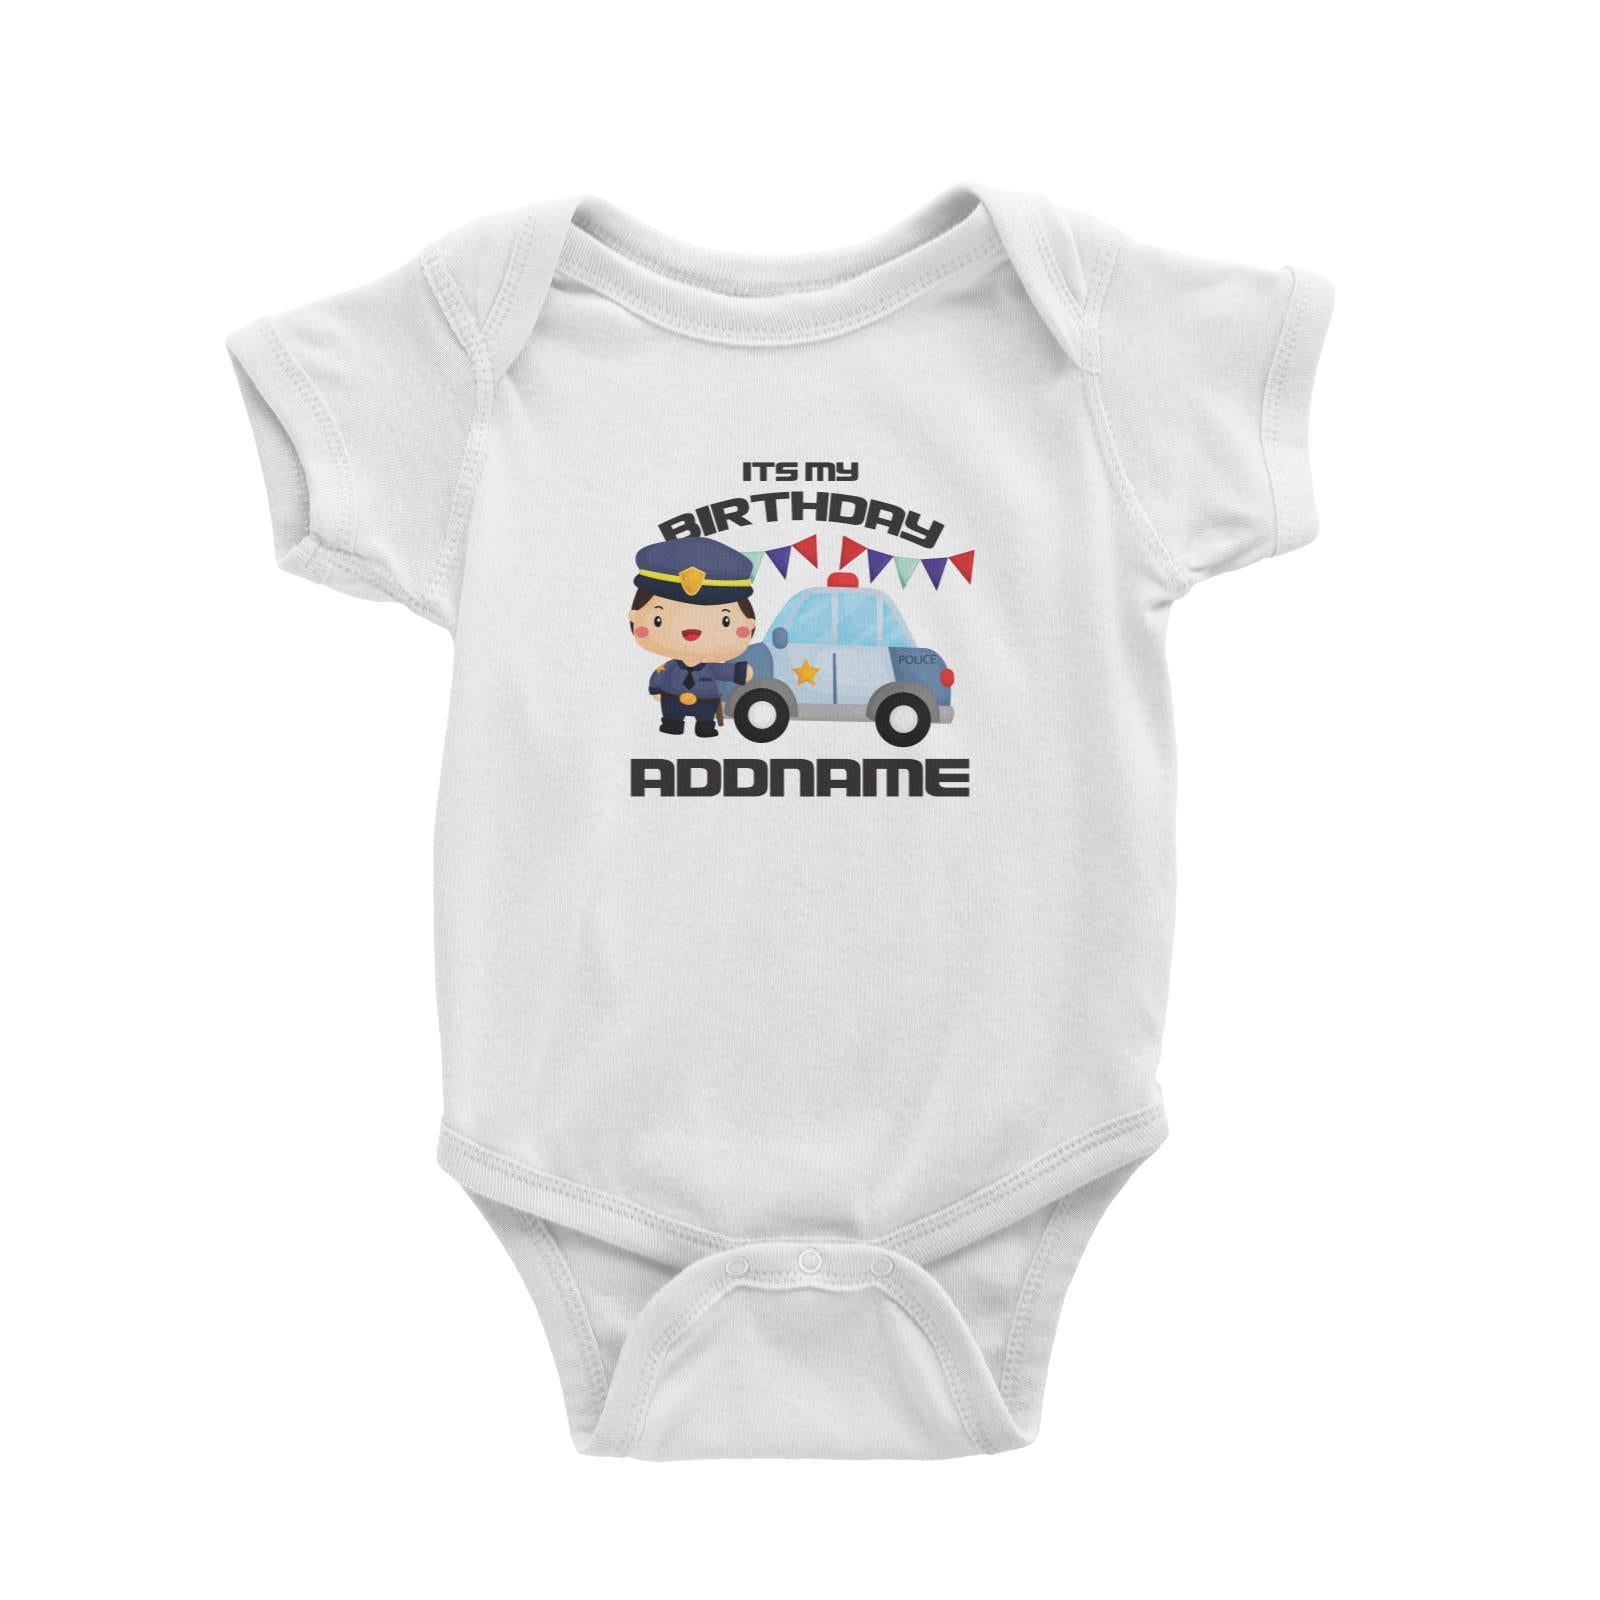 Birthday Police Officer Boy In Suit With Police Car Its My Birthday Addname Baby Romper